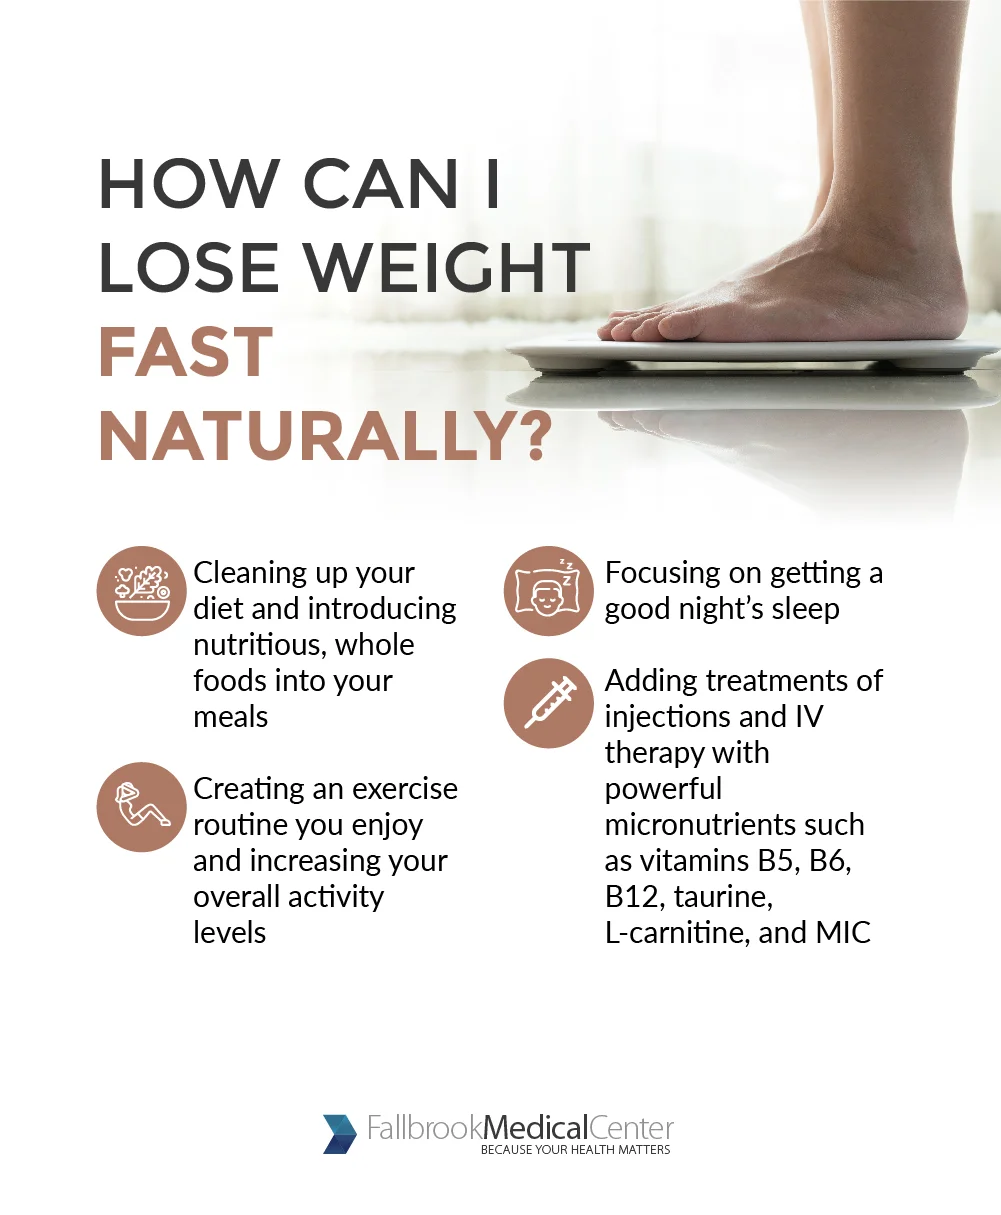 https://www.fallbrookmedicalcenter.com/wp-content/uploads/2022/03/How-Can-I-Lose-Weight-Fast-Naturally.webp